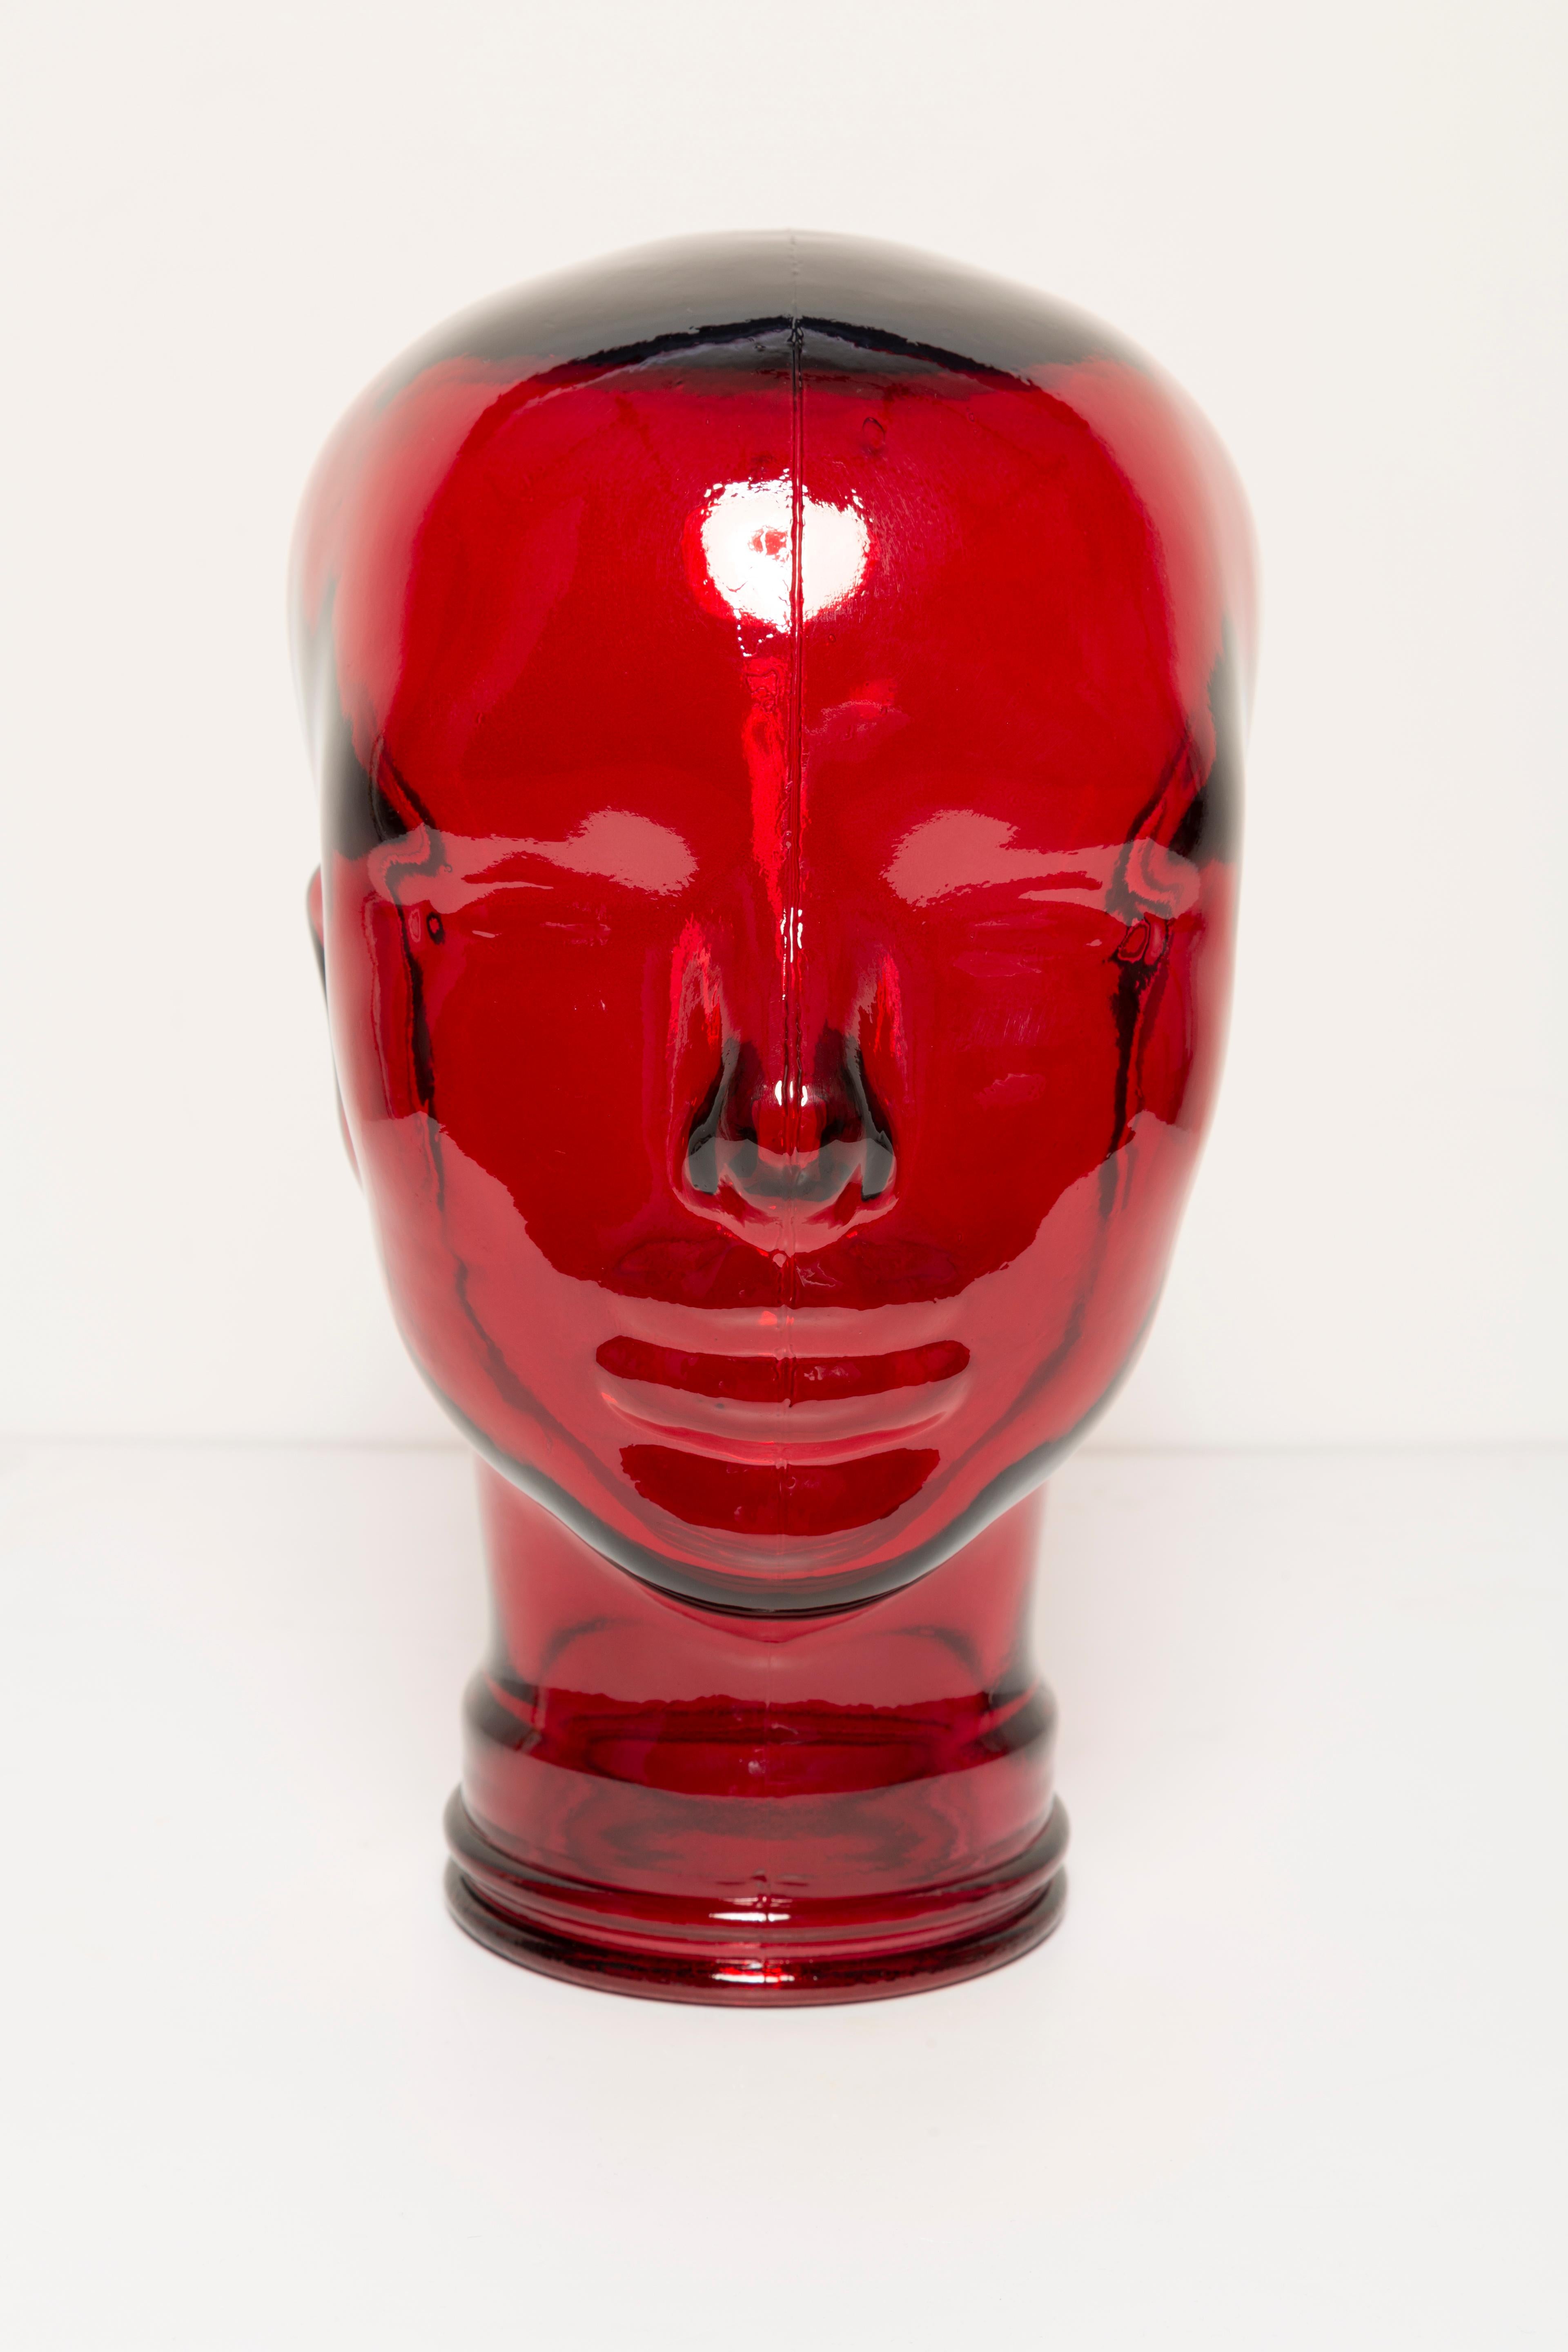 Life-size glass head in a unique red color. Produced in a German steelworks in the 1970s. Perfect condition. A perfect addition to the interior, photo prop, display or headphone stand.